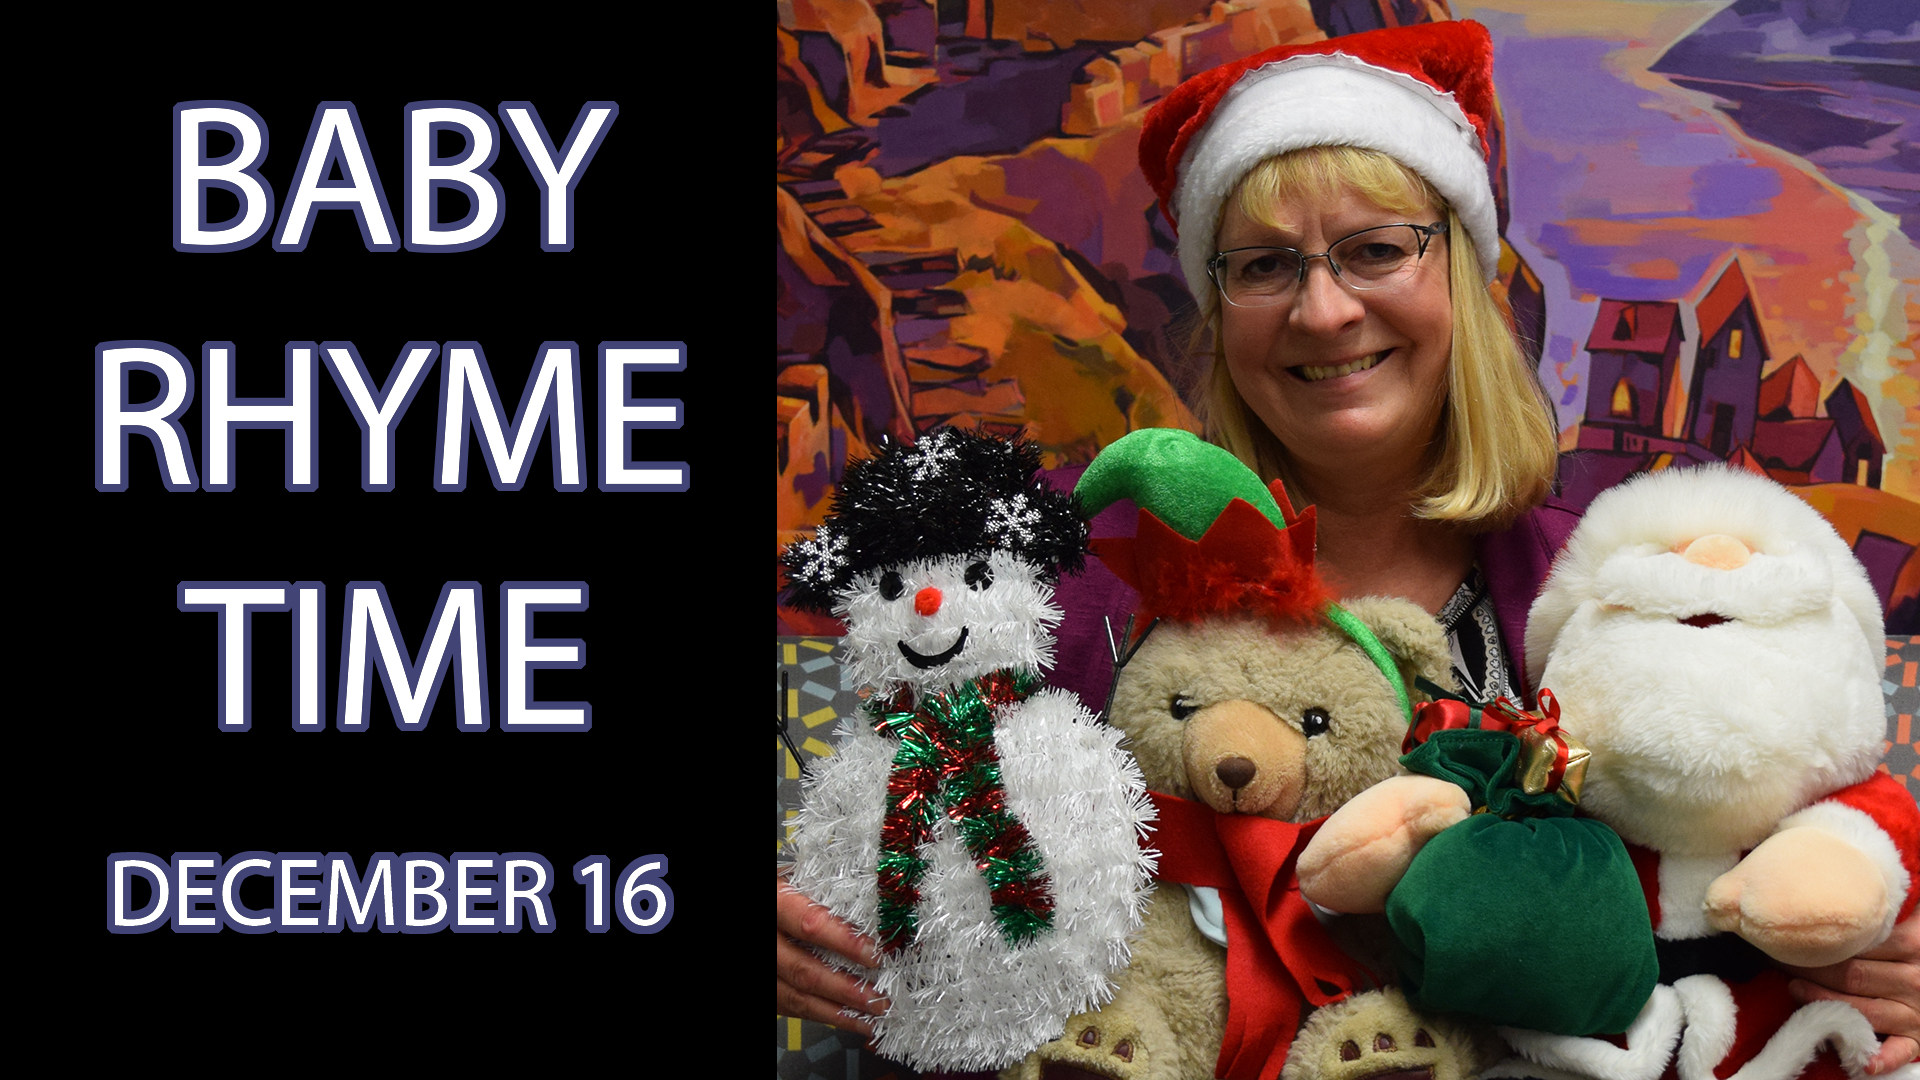 A woman holding a stuffed bear, Santa, and snowman sits next to the text "Baby Rhyme Time December 16"